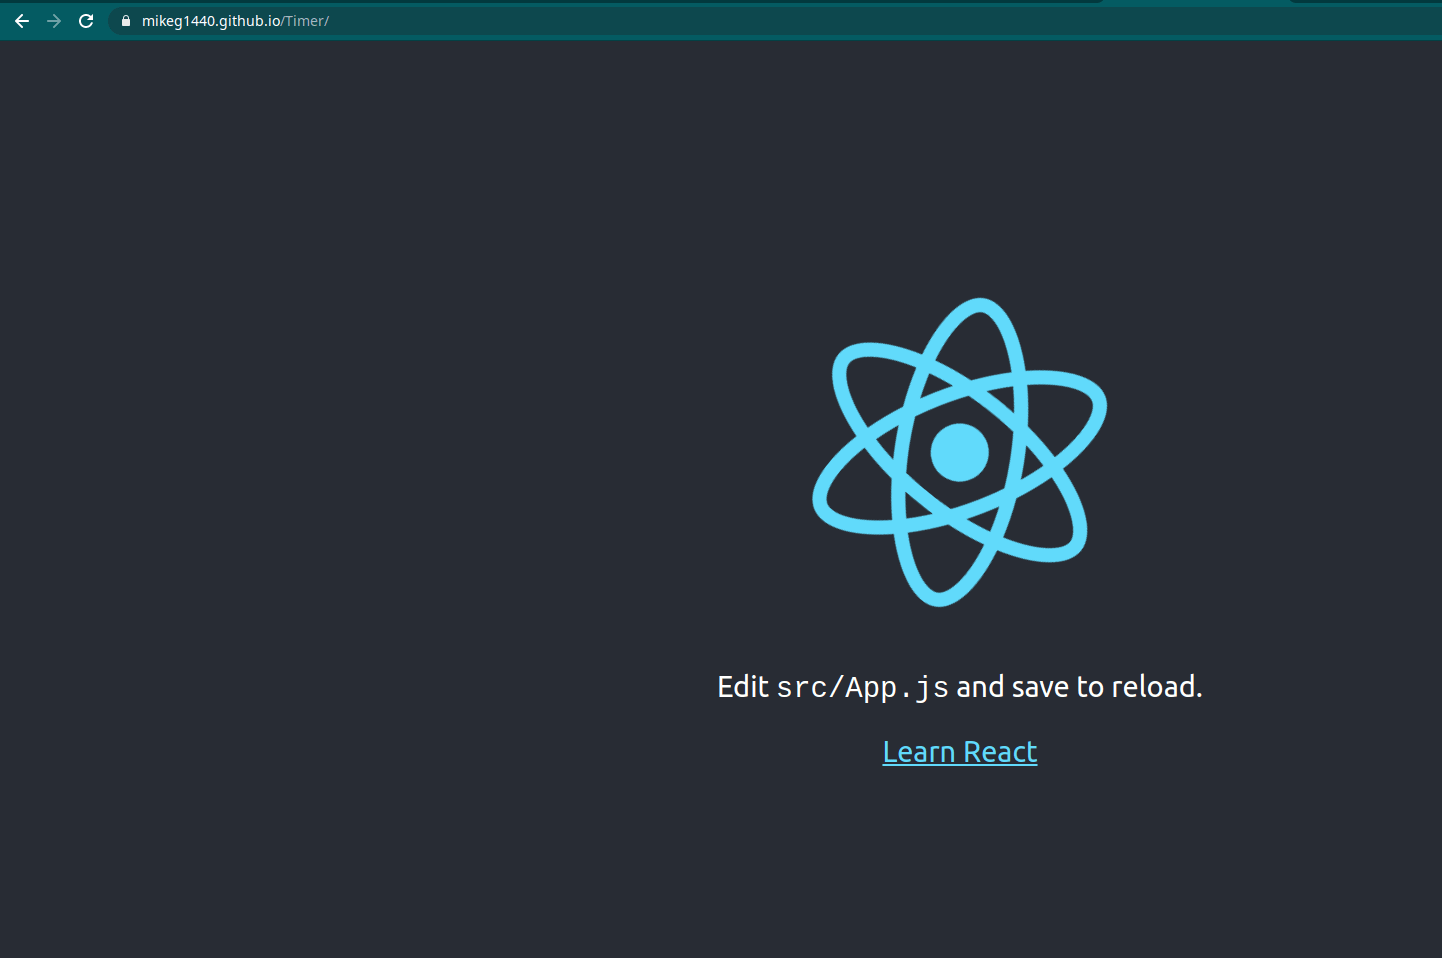 React app hosted using GitHub Pages